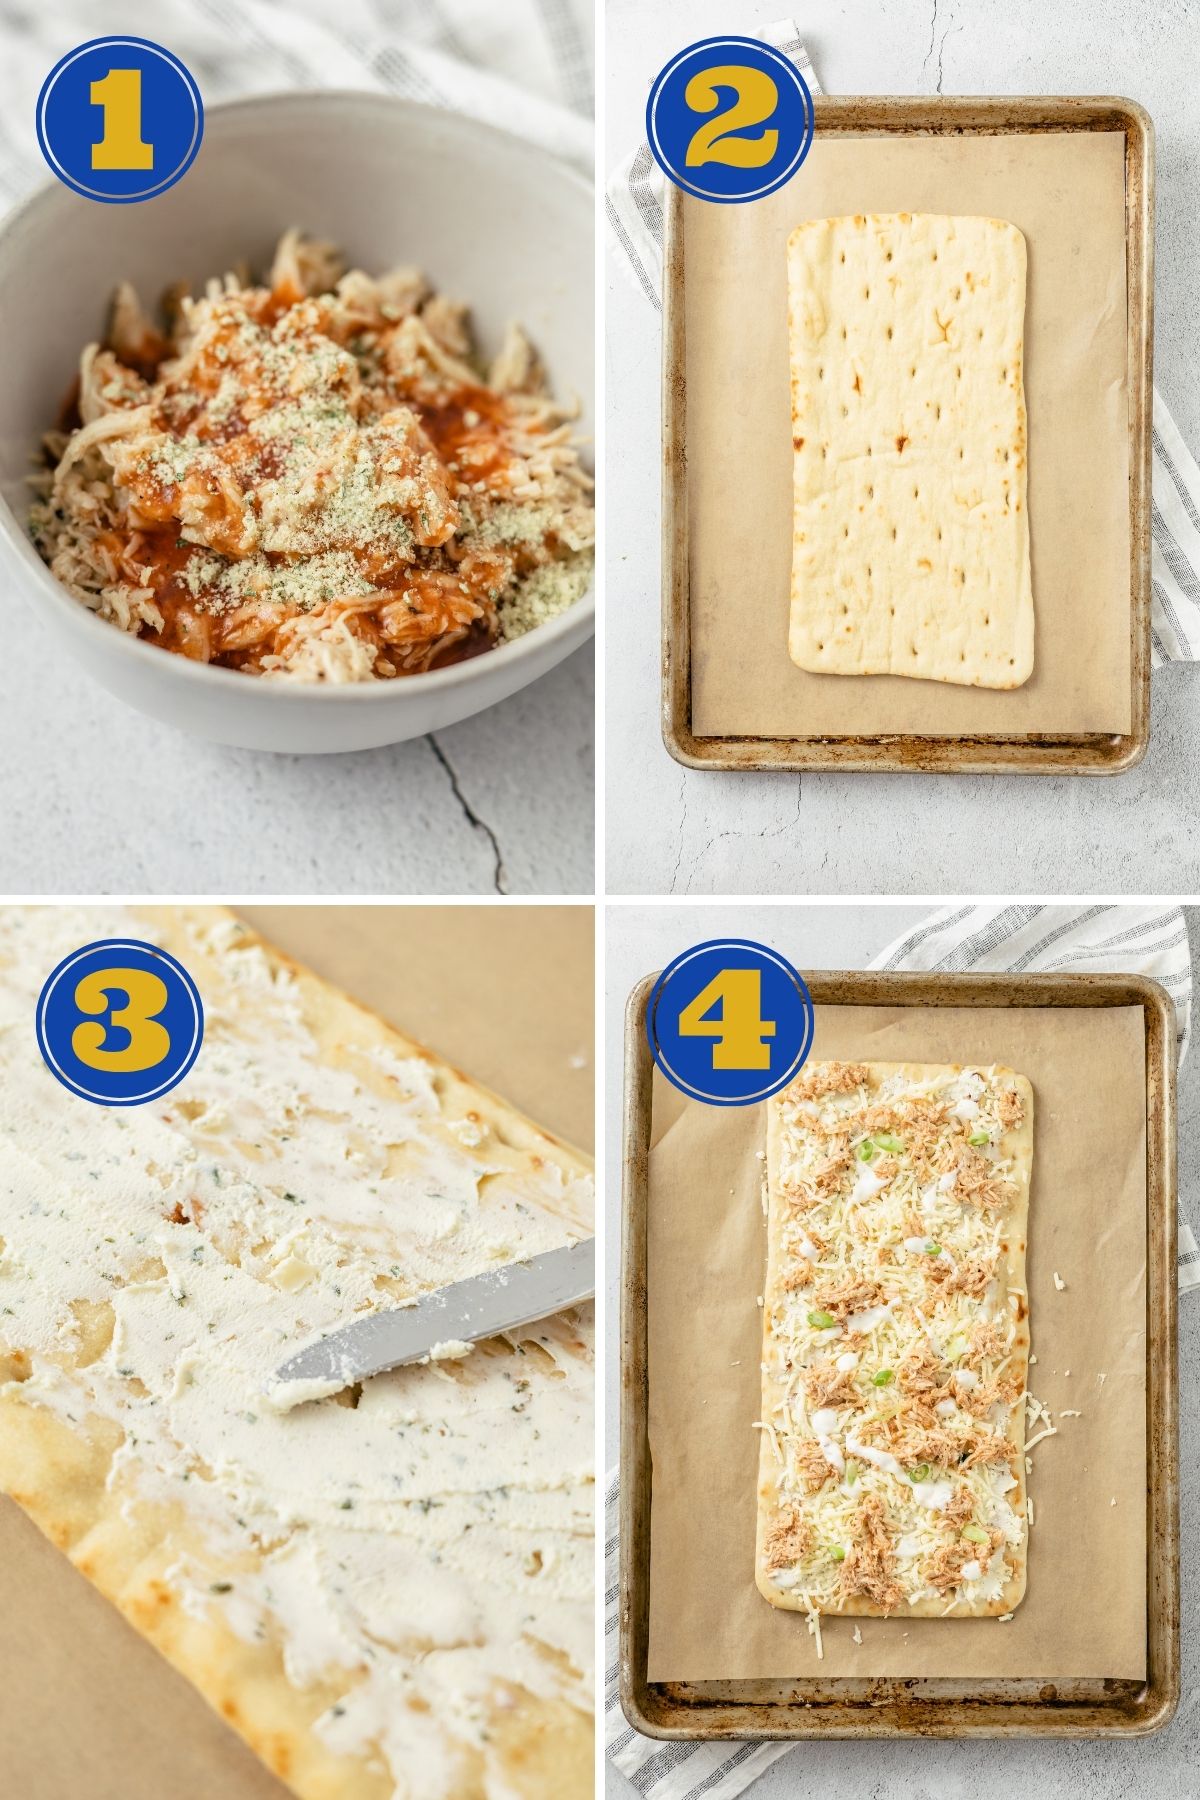 Step-by-step instructions to create Buffalo Chicken Flatbread pizza in the oven on a baking sheet with leftover shredded chicken, buffalo sauce, and ranch seasoning.